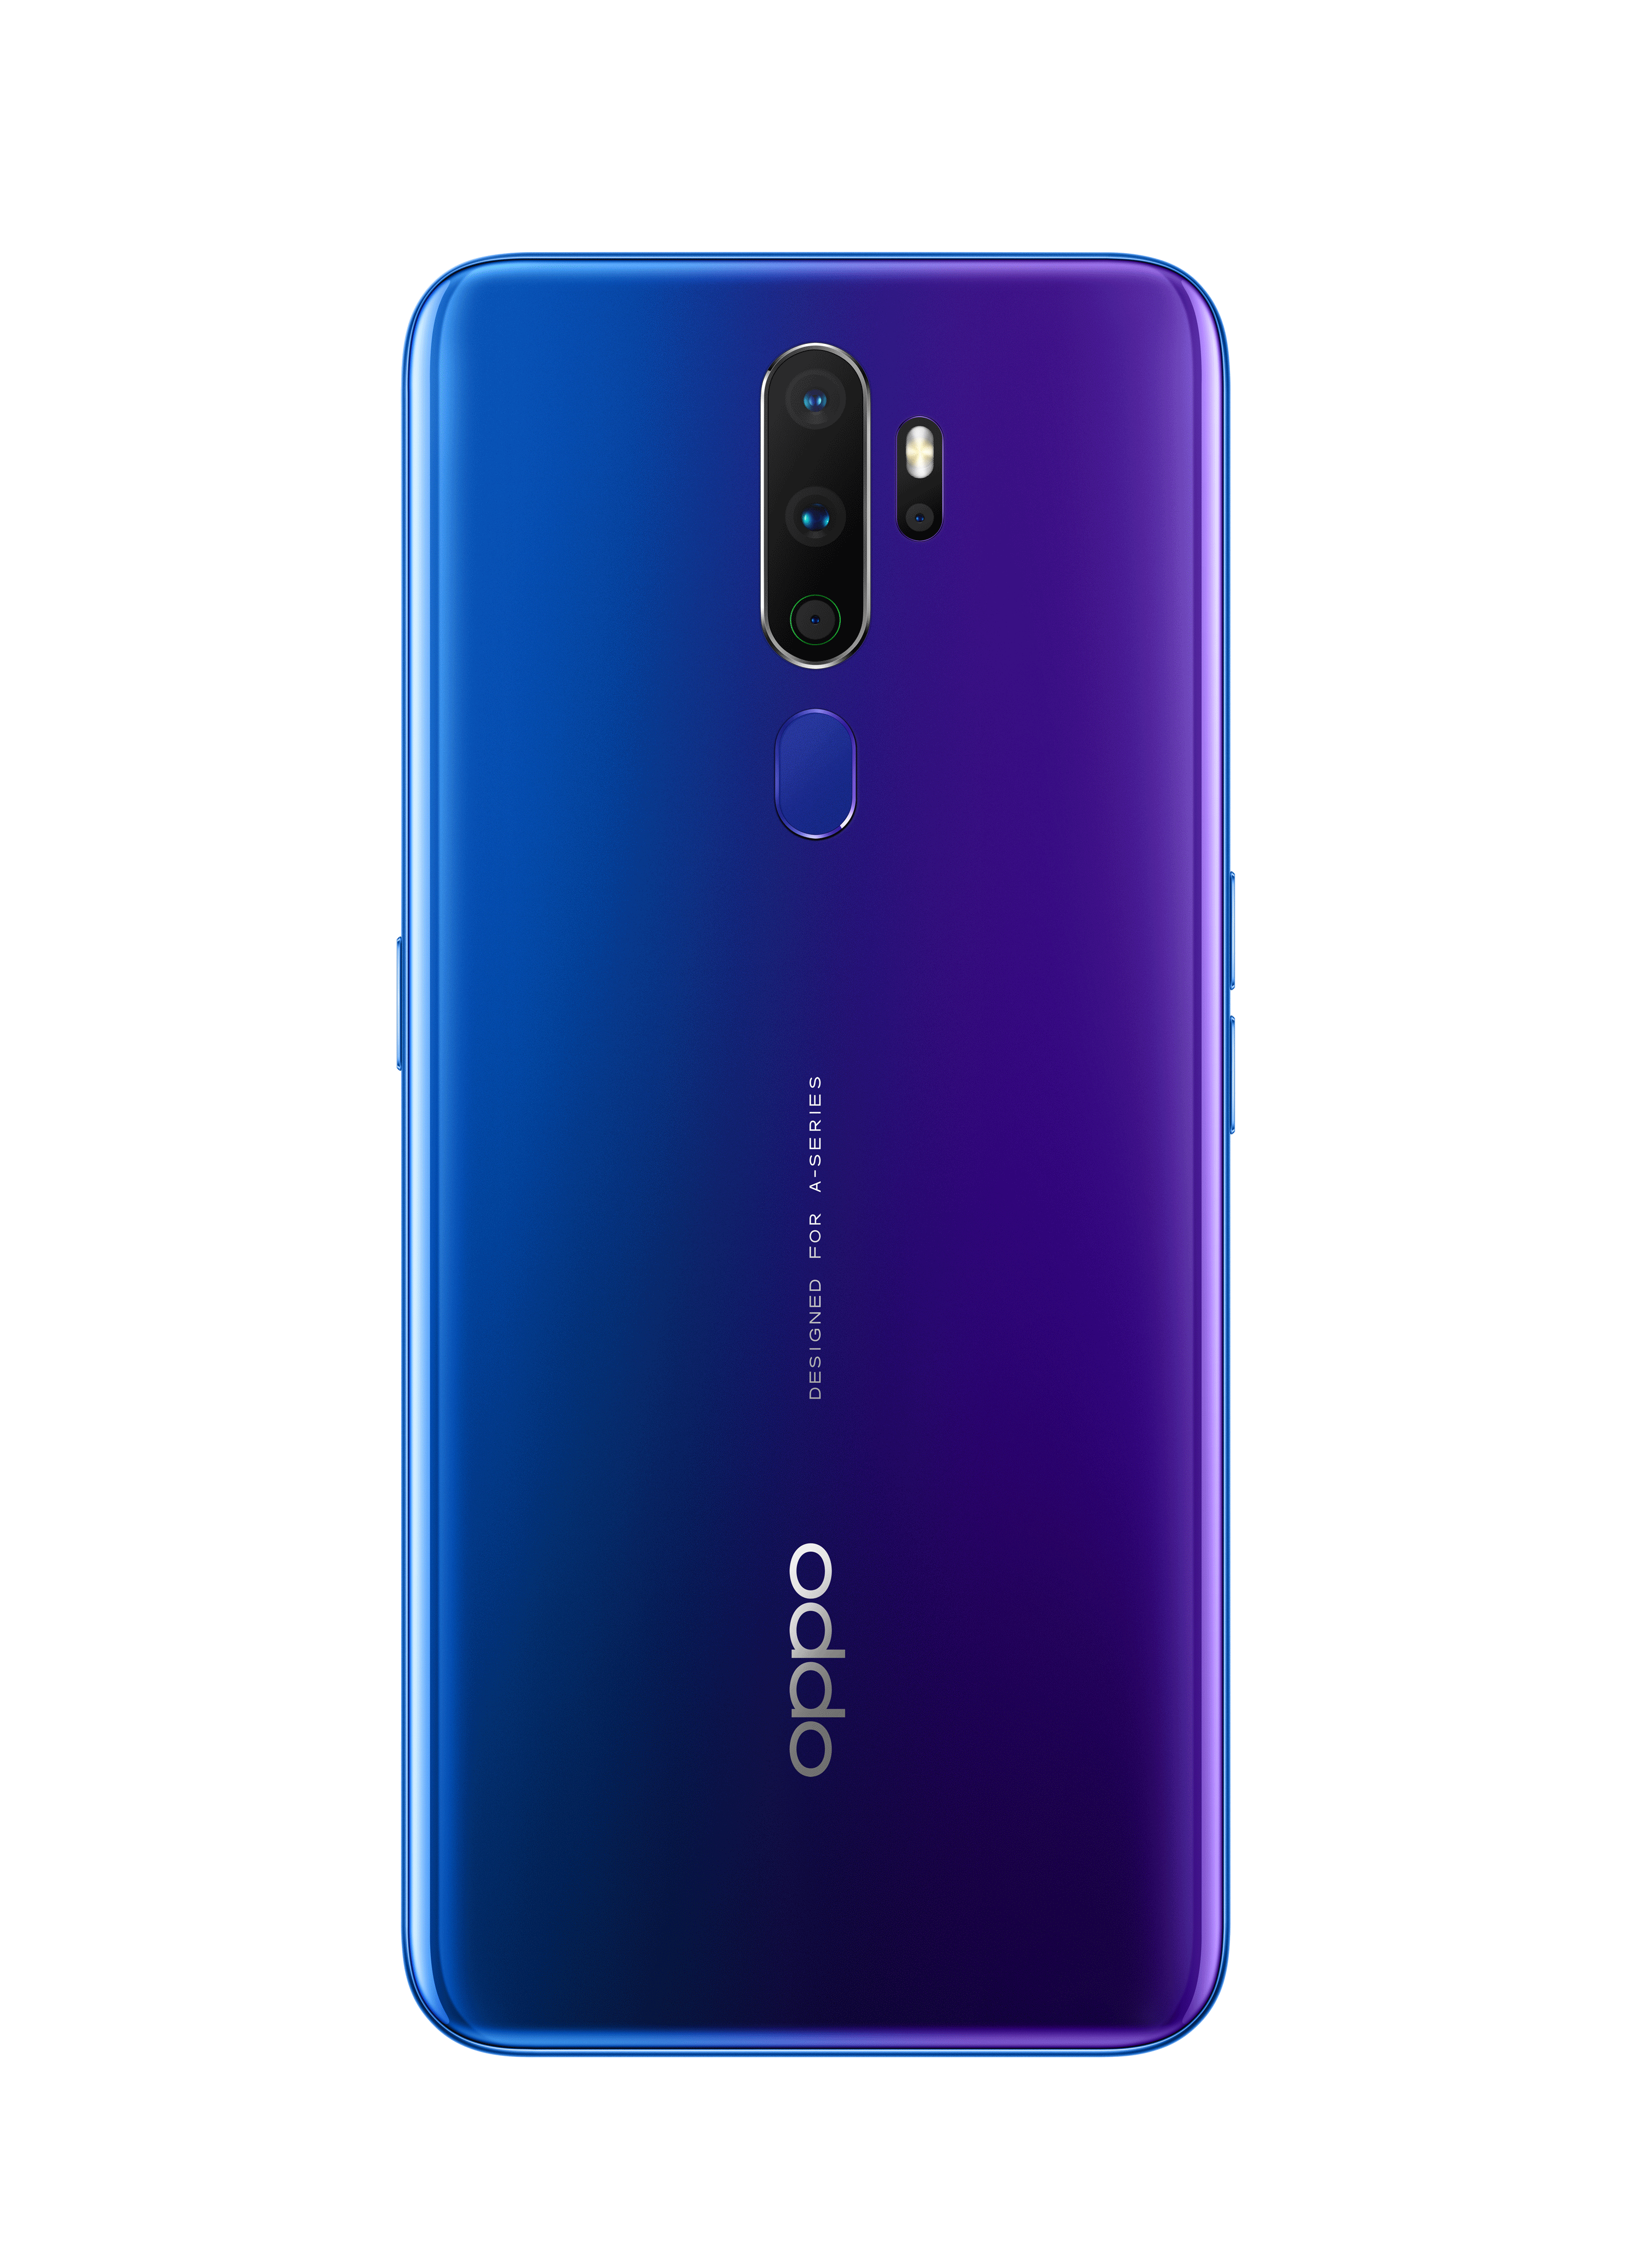 OPPO Launches Brand New A Series 2020 Smartphone - Tech News Century